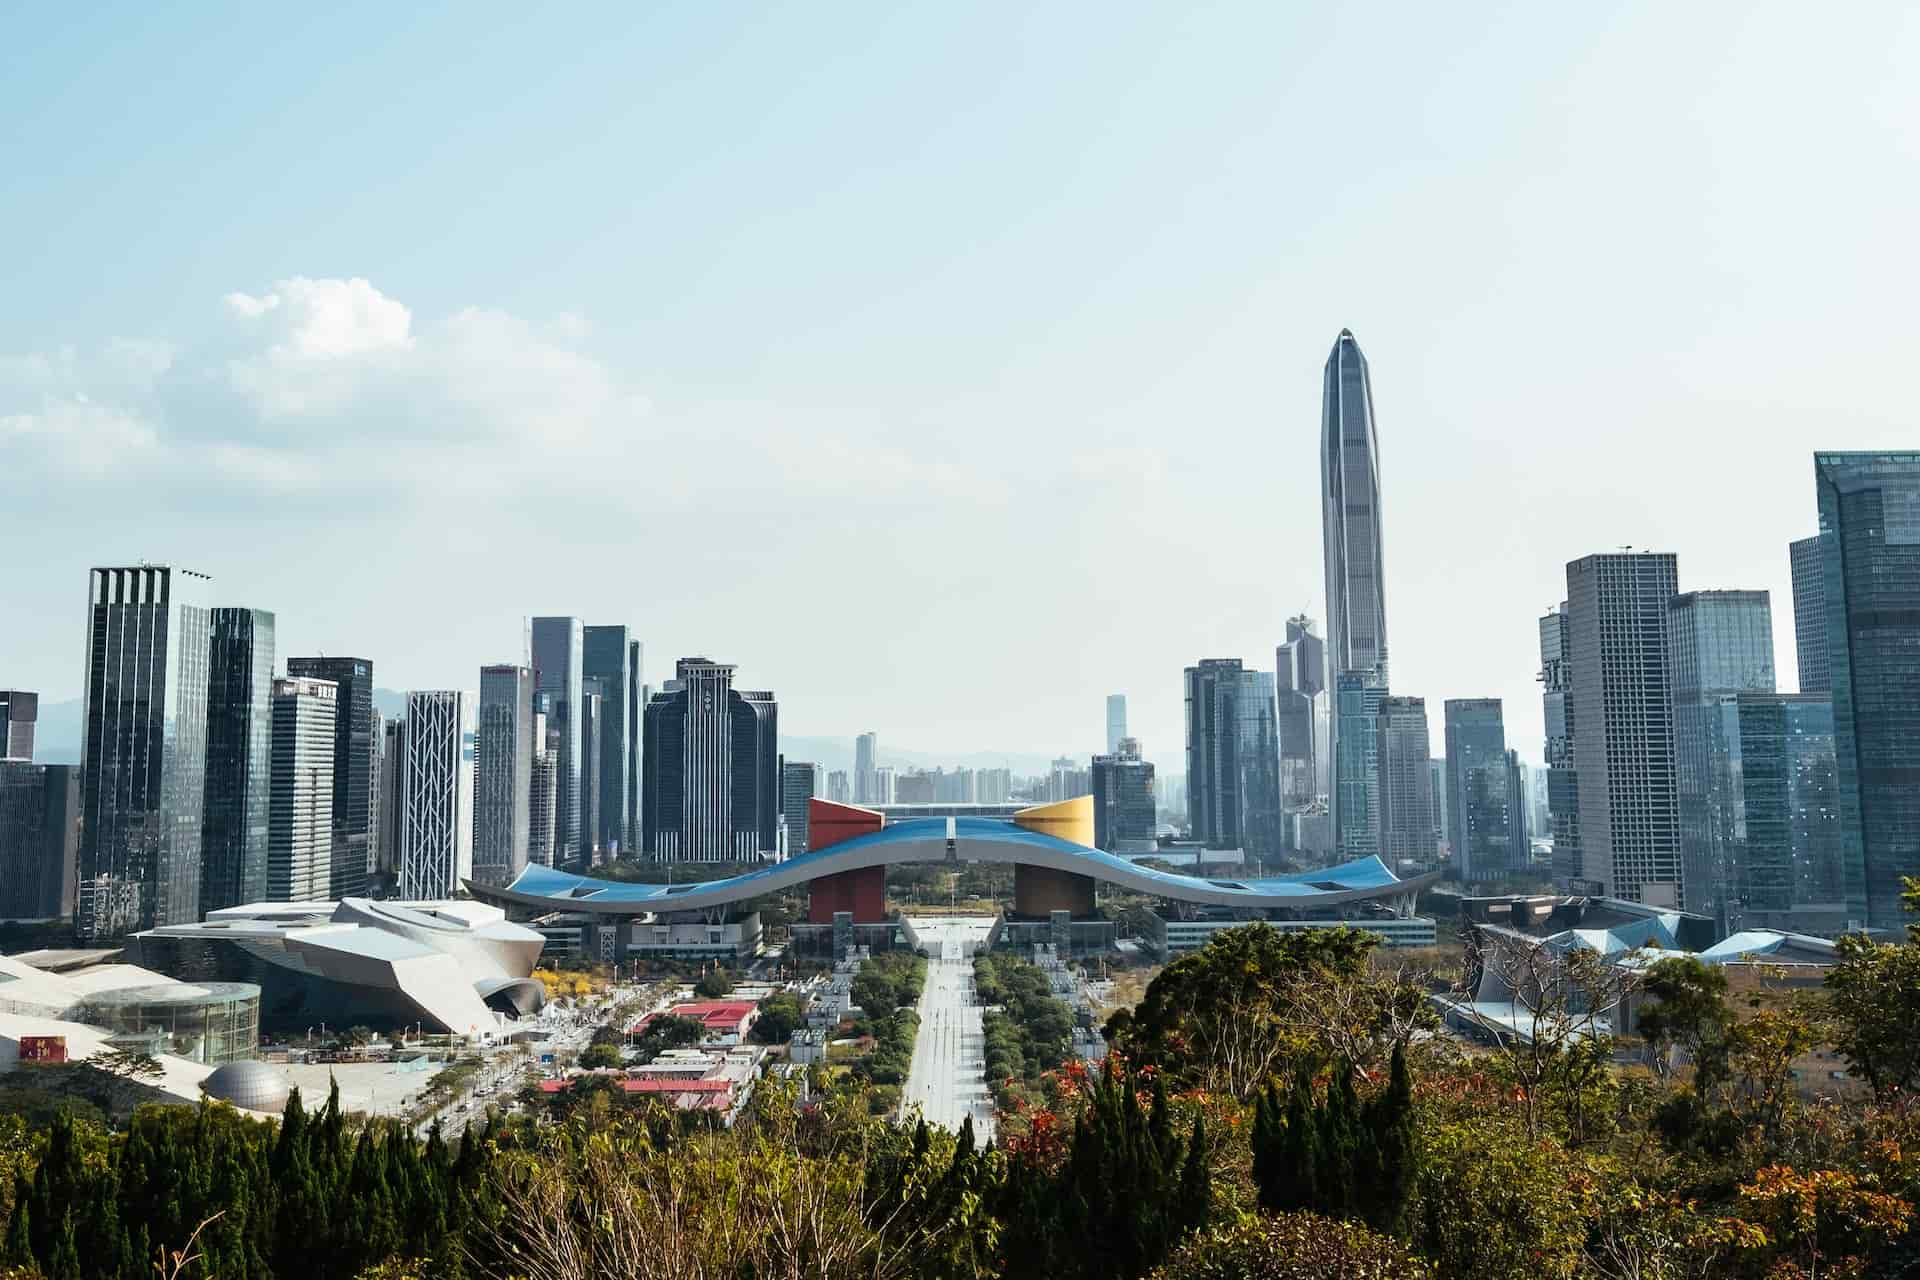 Shenzhen, China: The Silicon Valley of Architecture